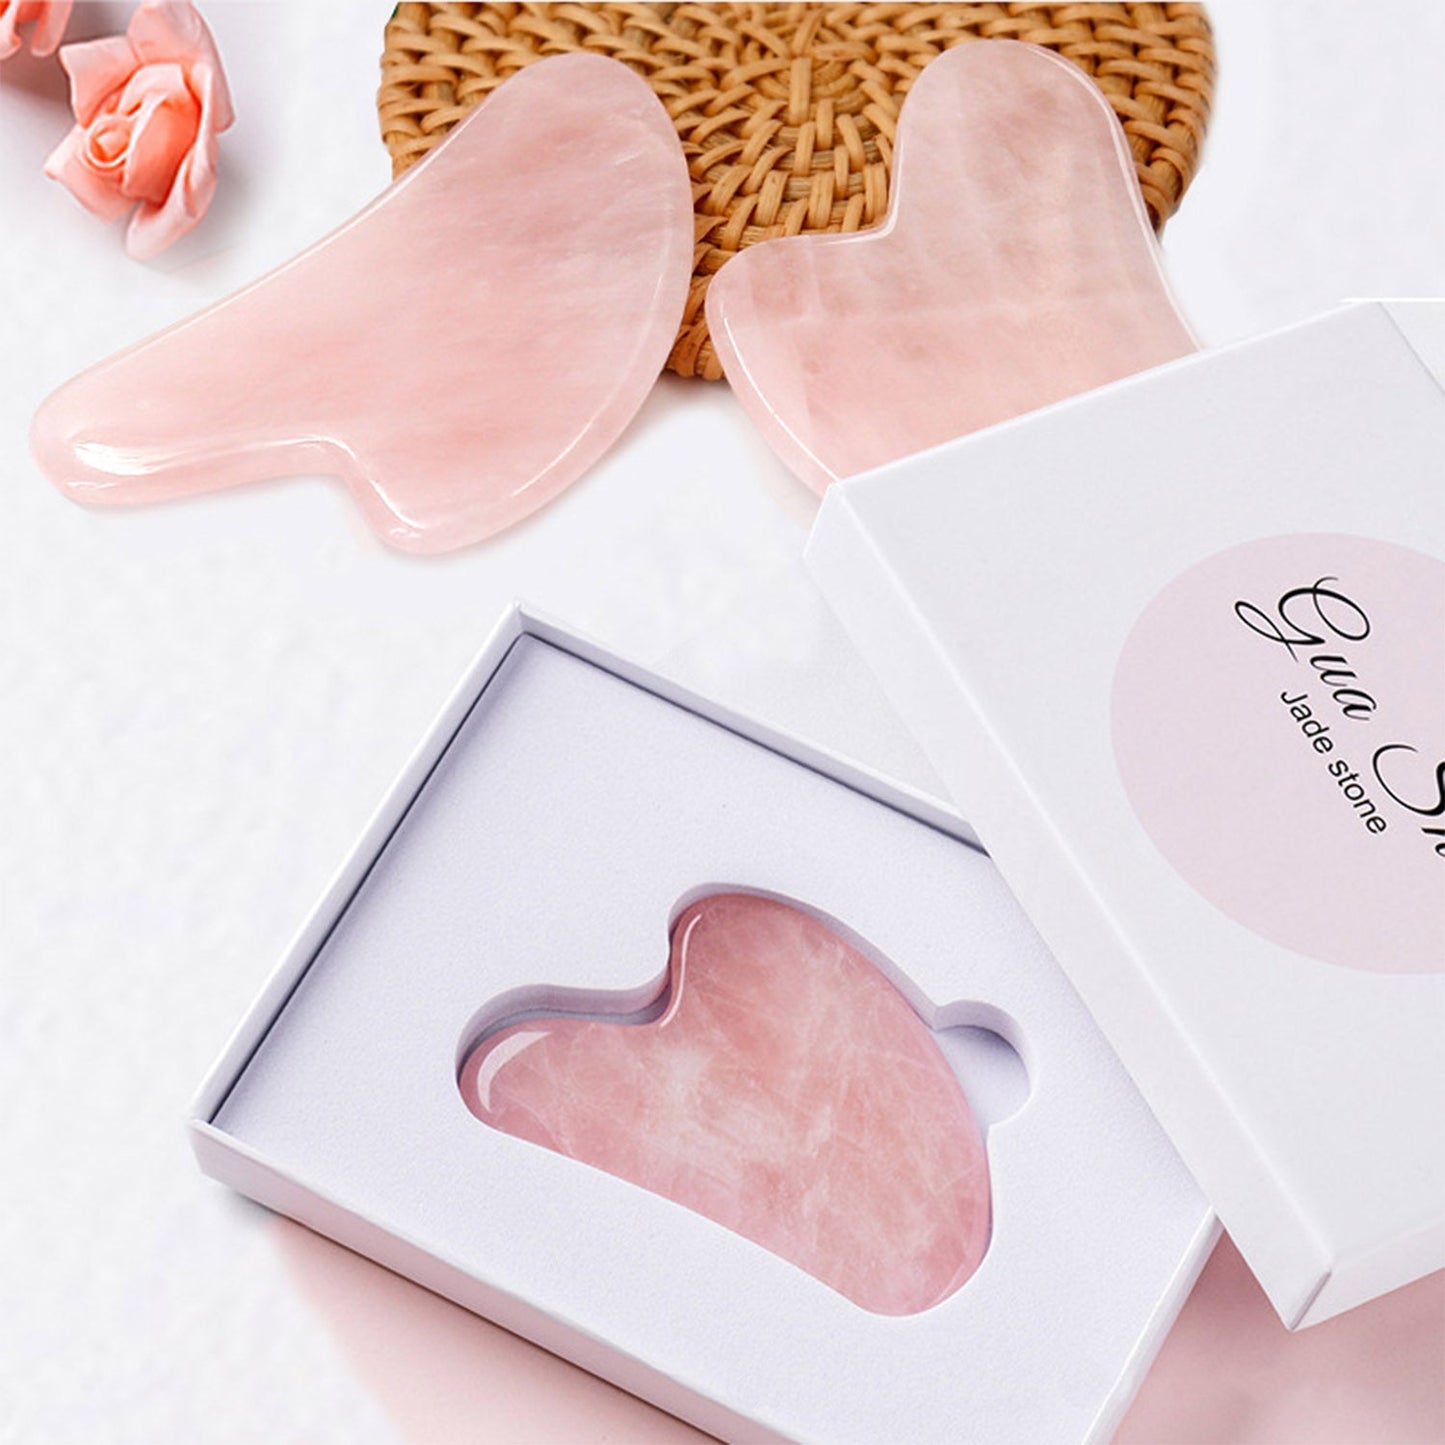 AOXILY Rose Quartz Gua Sha Tool Aoxily CHN, Inc. All Rights Reserved.